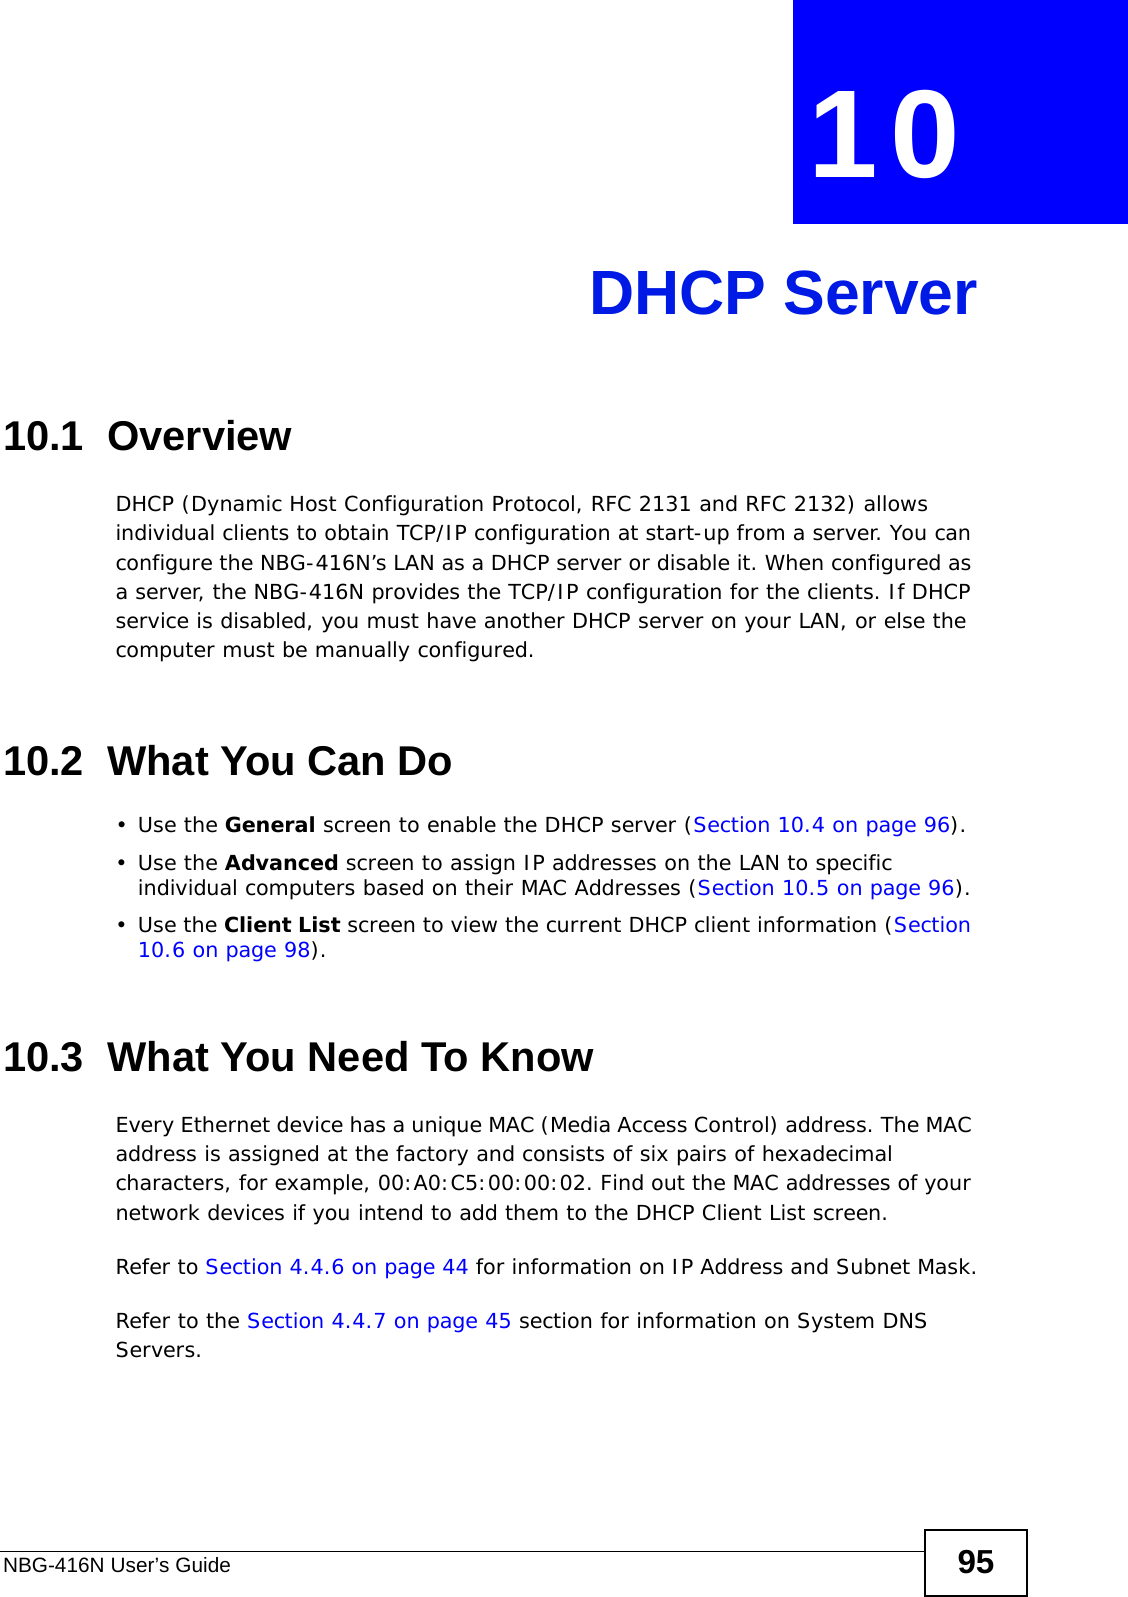 NBG-416N User’s Guide 95CHAPTER  10 DHCP Server10.1  OverviewDHCP (Dynamic Host Configuration Protocol, RFC 2131 and RFC 2132) allows individual clients to obtain TCP/IP configuration at start-up from a server. You can configure the NBG-416N’s LAN as a DHCP server or disable it. When configured as a server, the NBG-416N provides the TCP/IP configuration for the clients. If DHCP service is disabled, you must have another DHCP server on your LAN, or else the computer must be manually configured.10.2  What You Can Do•Use the General screen to enable the DHCP server (Section 10.4 on page 96).•Use the Advanced screen to assign IP addresses on the LAN to specific individual computers based on their MAC Addresses (Section 10.5 on page 96).•Use the Client List screen to view the current DHCP client information (Section 10.6 on page 98). 10.3  What You Need To KnowEvery Ethernet device has a unique MAC (Media Access Control) address. The MAC address is assigned at the factory and consists of six pairs of hexadecimal characters, for example, 00:A0:C5:00:00:02. Find out the MAC addresses of your network devices if you intend to add them to the DHCP Client List screen.Refer to Section 4.4.6 on page 44 for information on IP Address and Subnet Mask.Refer to the Section 4.4.7 on page 45 section for information on System DNS Servers.